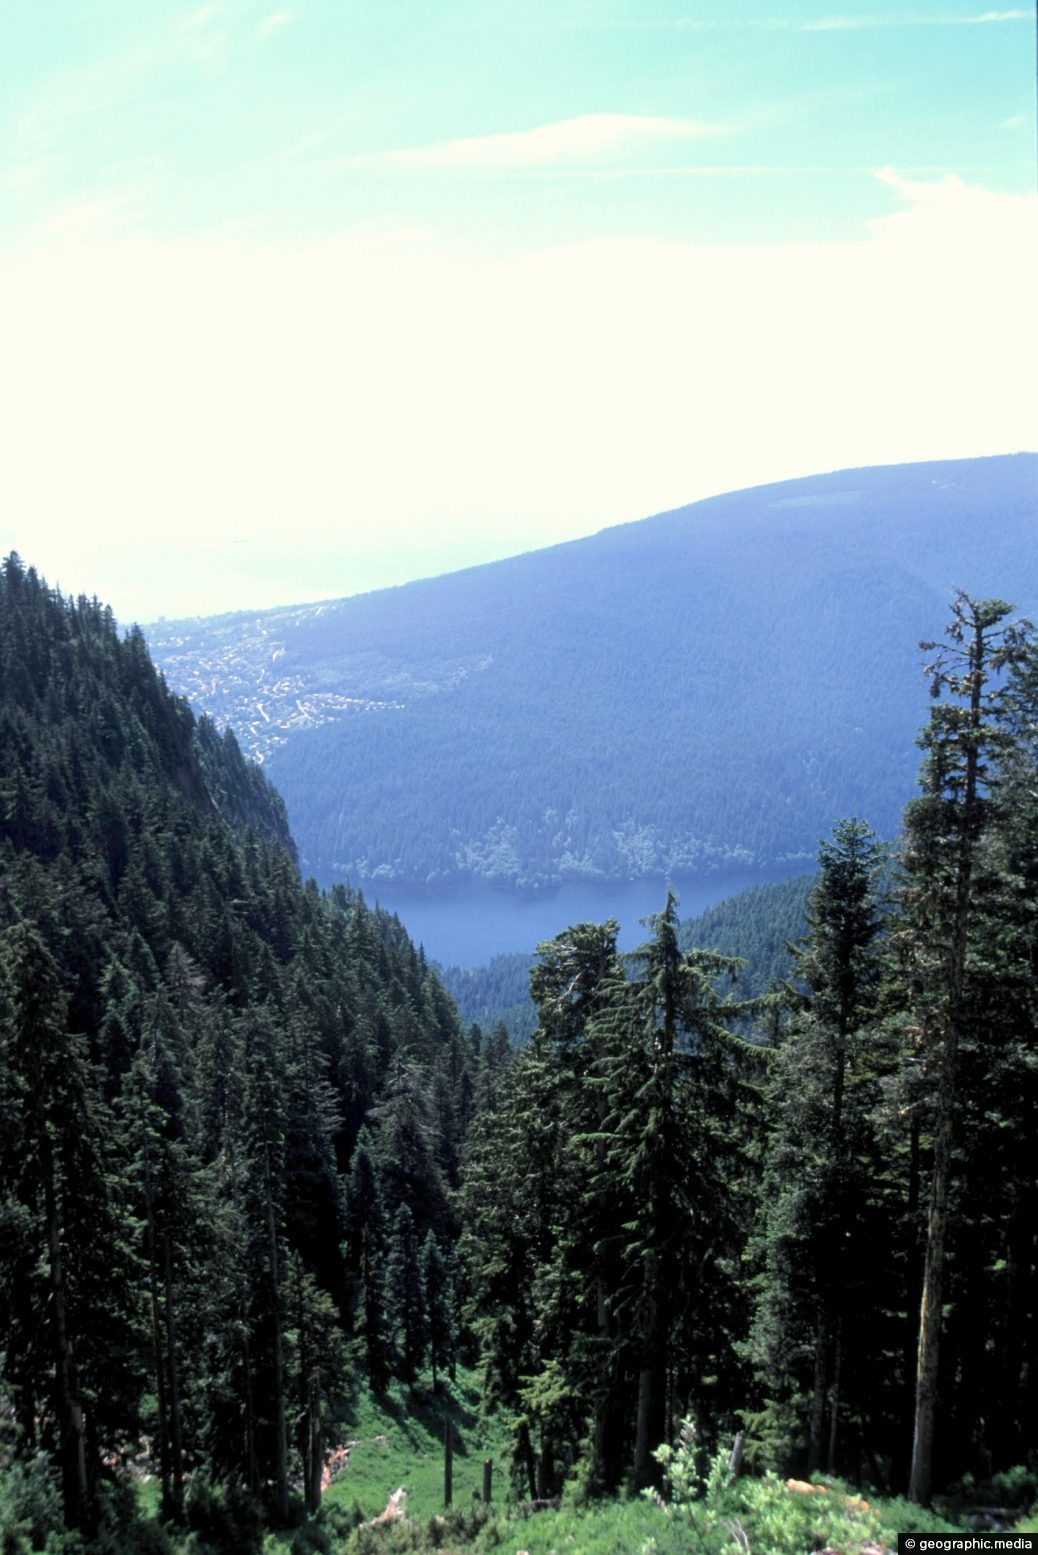 Northshore Mountains near Vancouver